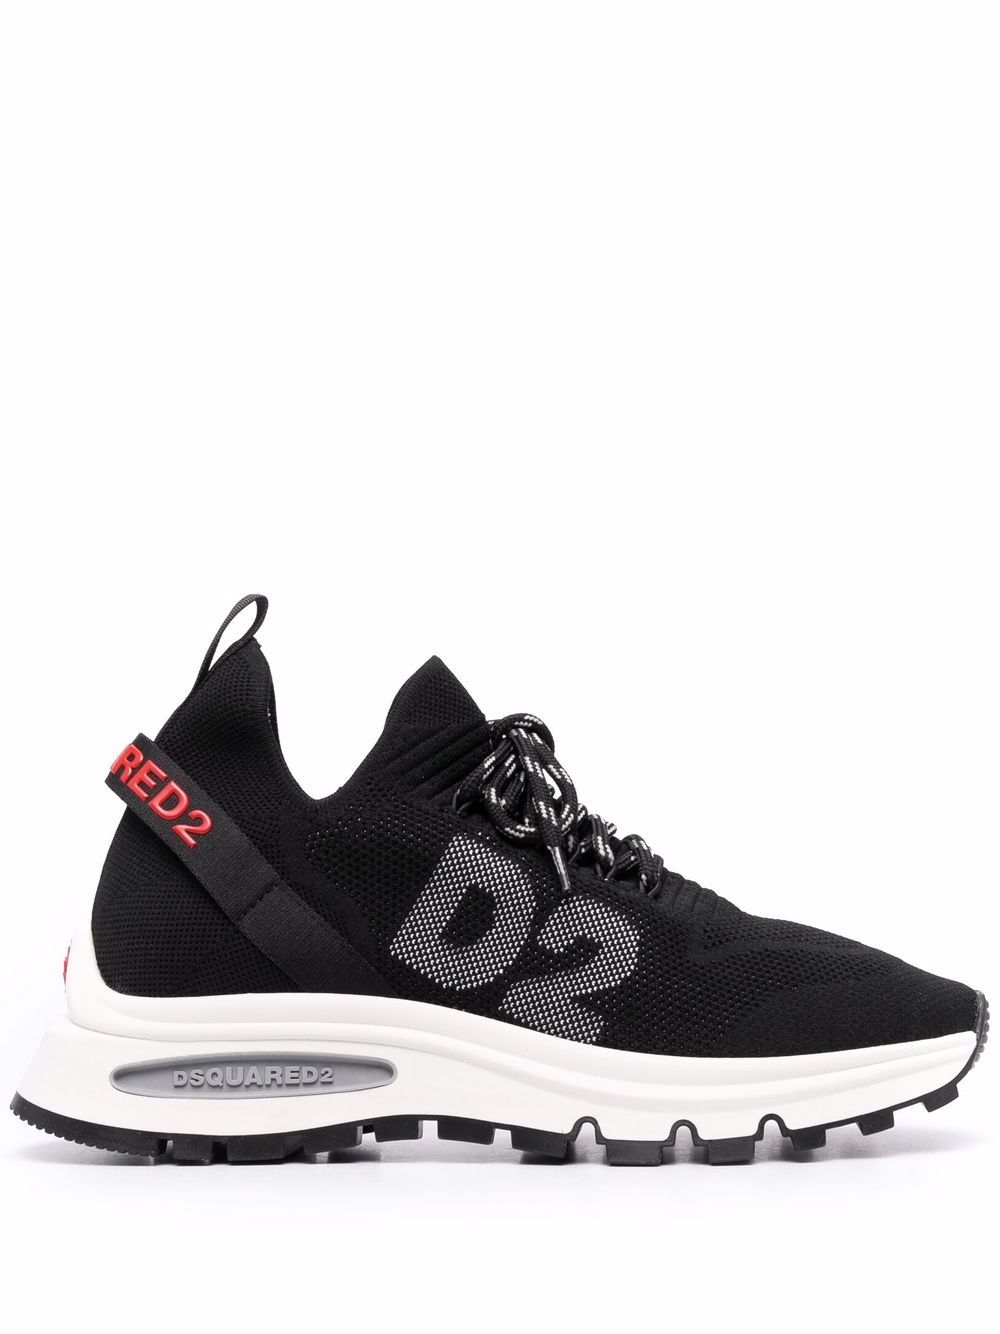 Dsquared2 Run DS2 low-top sneakers - Black von Dsquared2